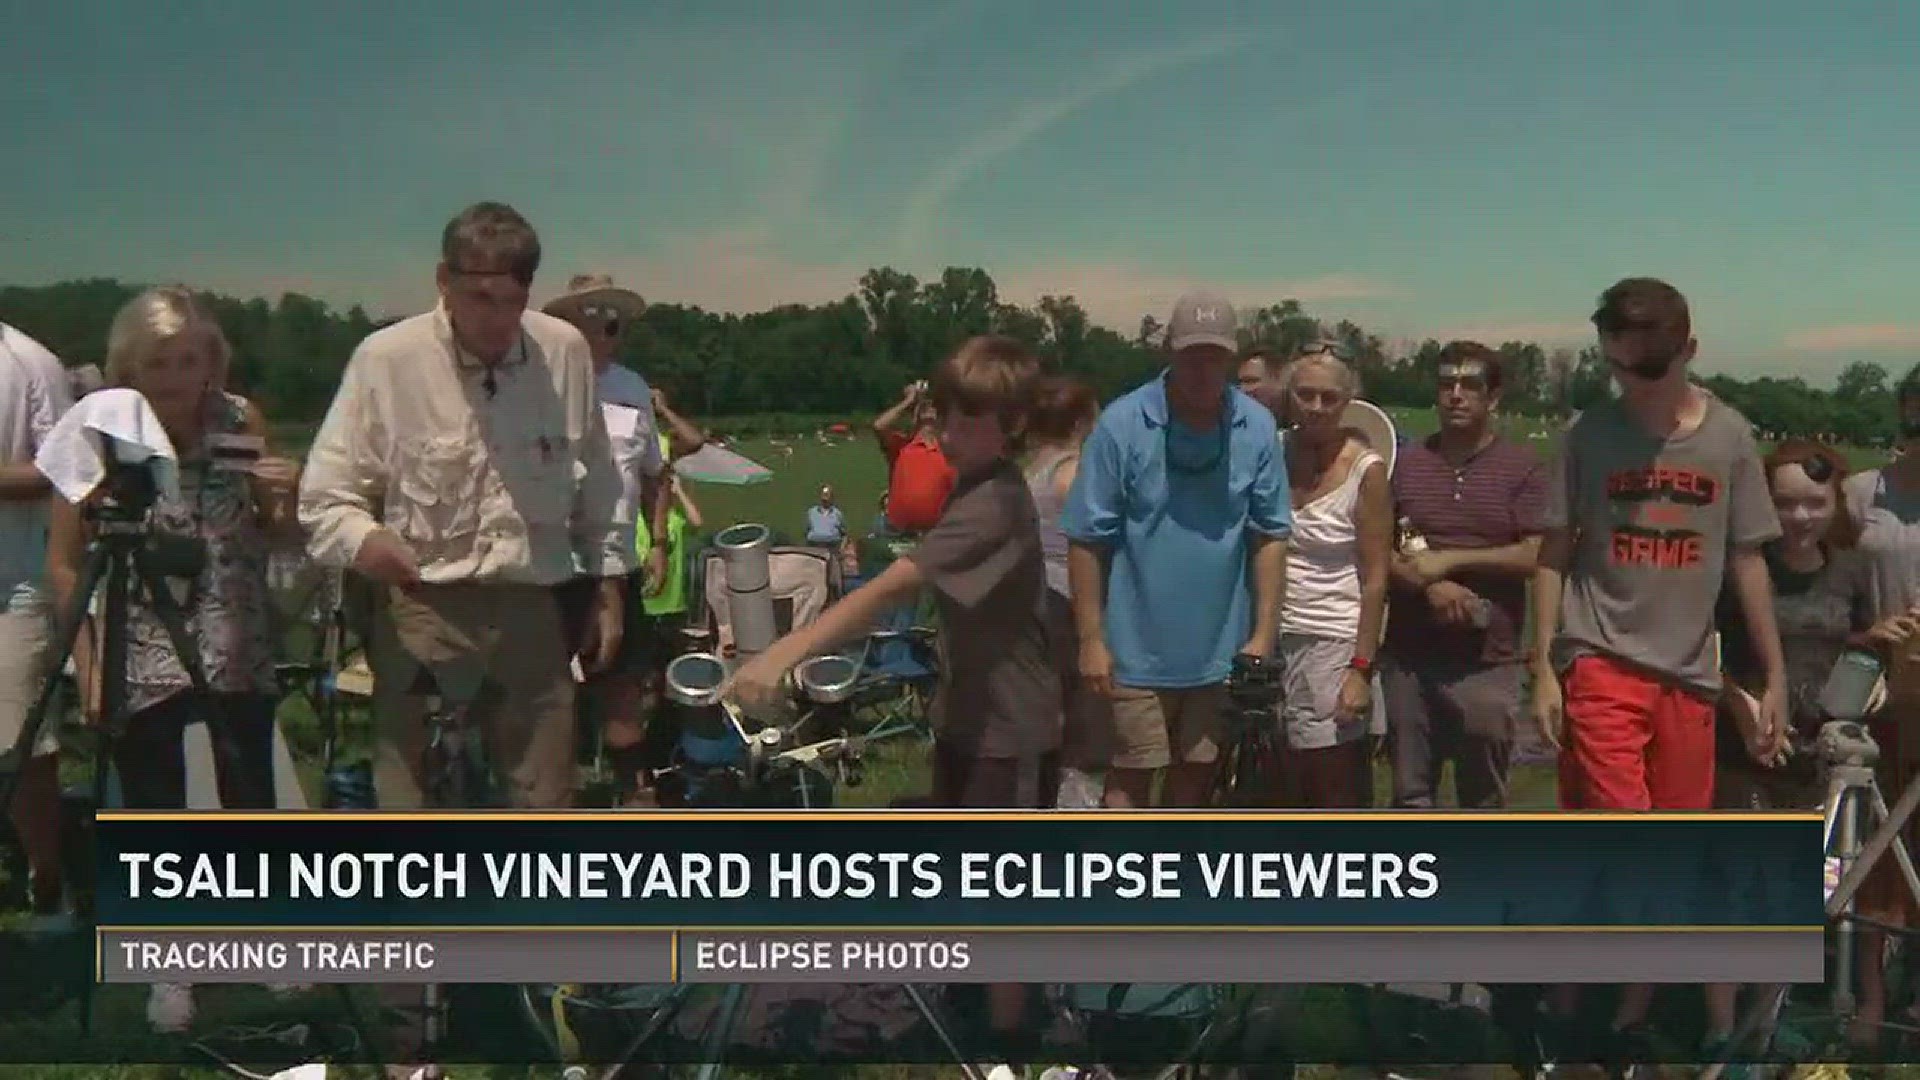 Aug. 21, 2017: Eclipse viewers experienced two-and-a-half magical minutes of totality at Tsali Notch Vineyard.